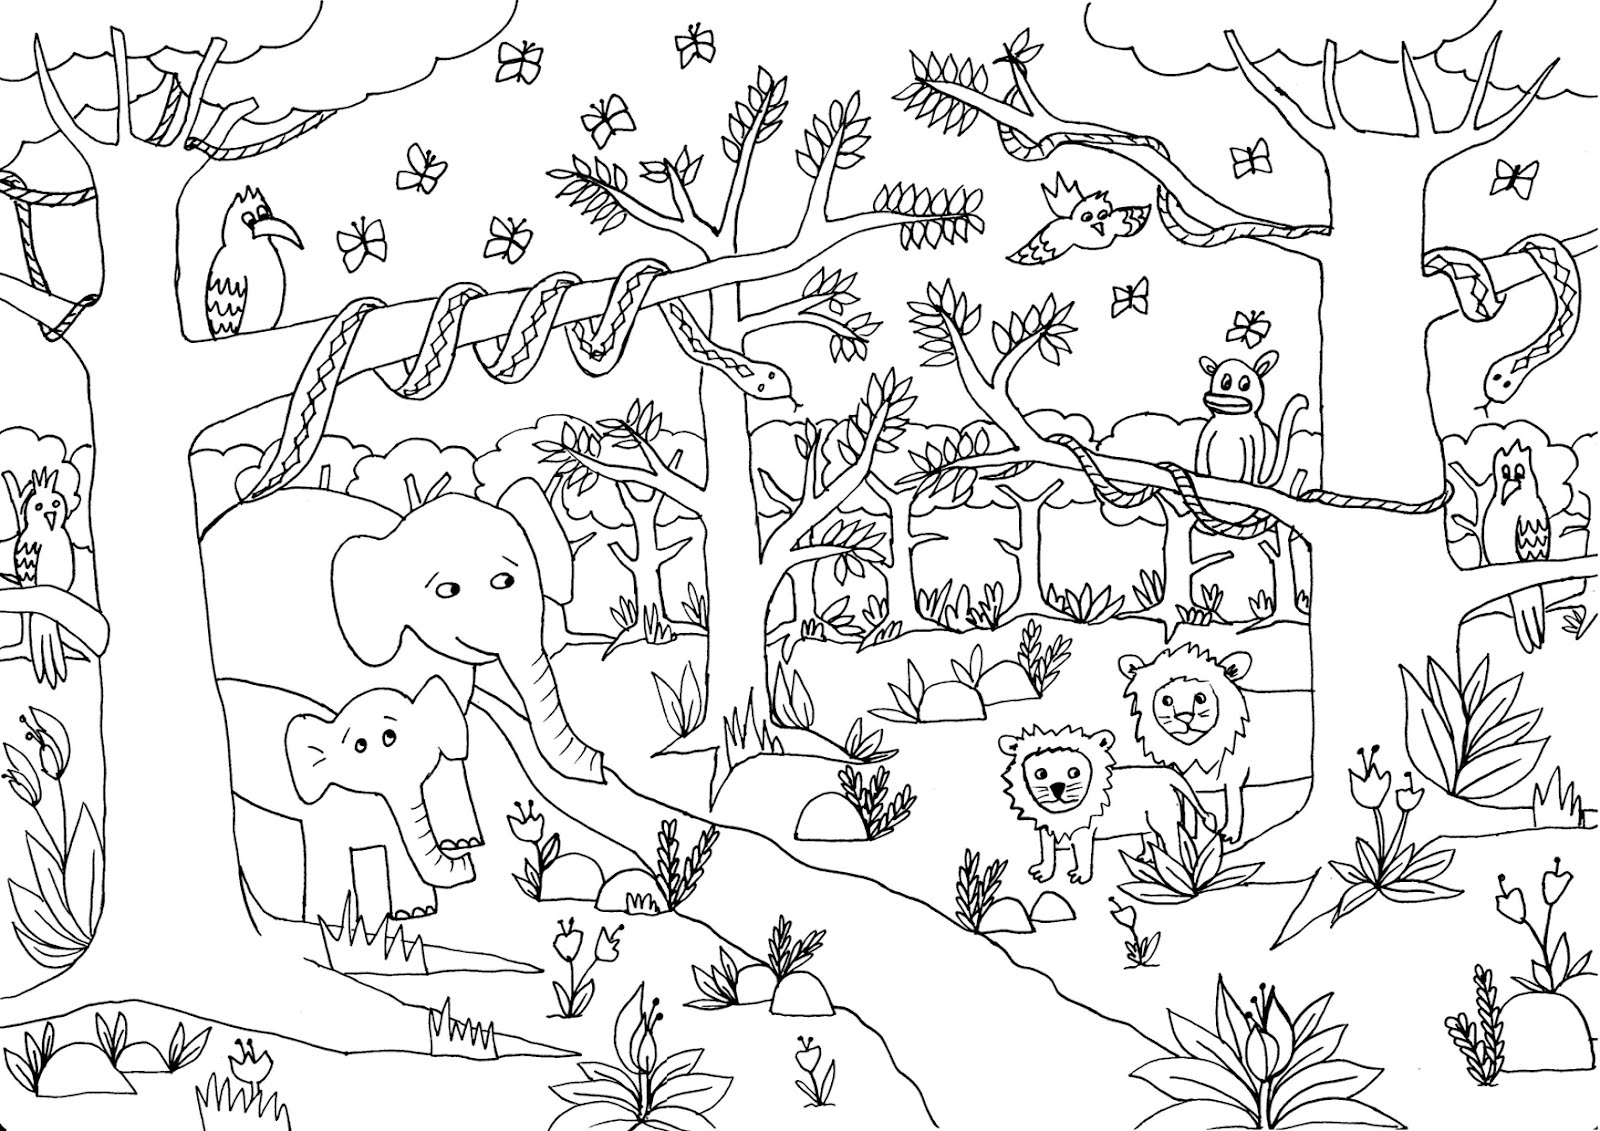 Jungle Coloring Pages 9 Jungle Animals Coloring Pages Gtgt Disney Coloring Pages